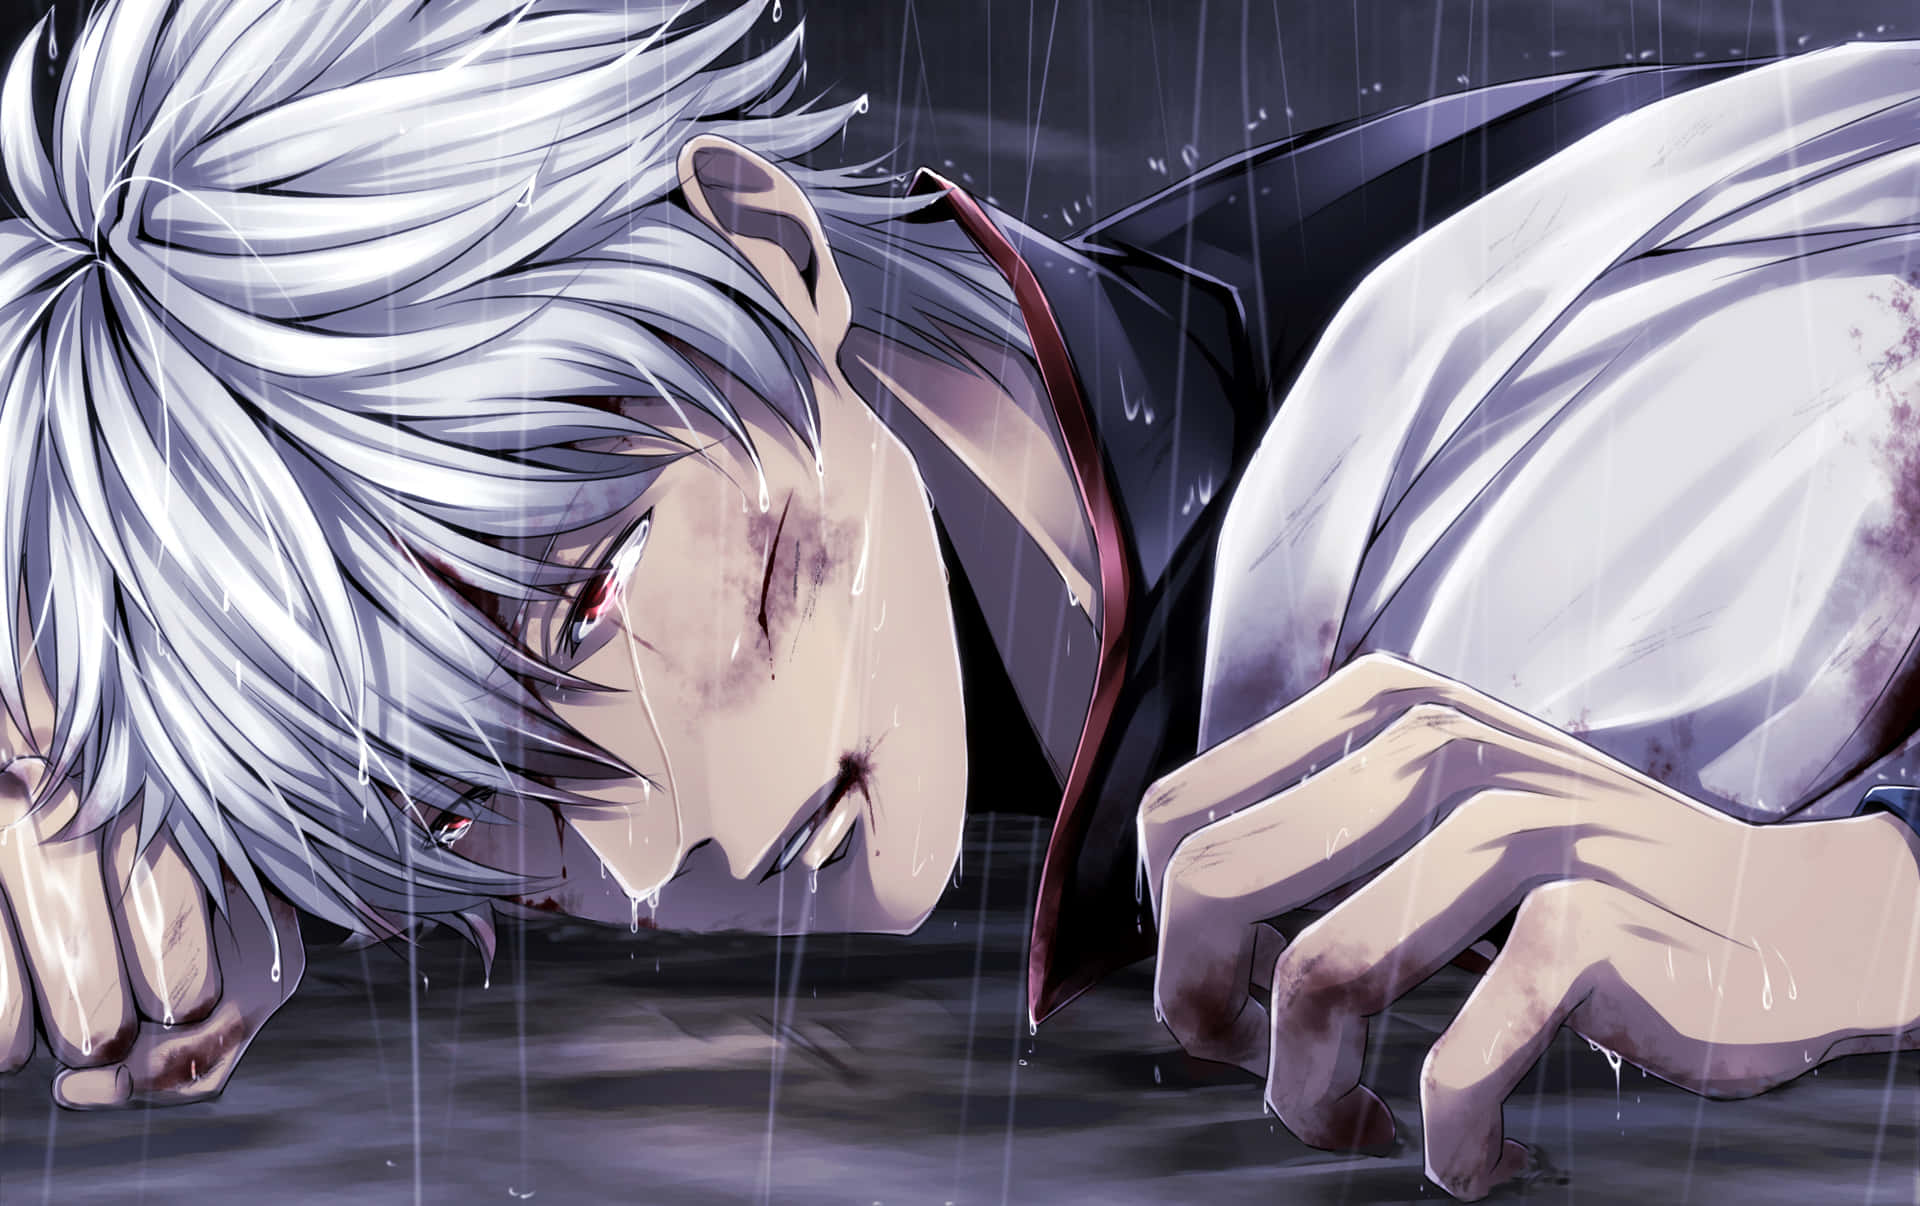 A mysterious young samurai from the anime series Gintama Wallpaper